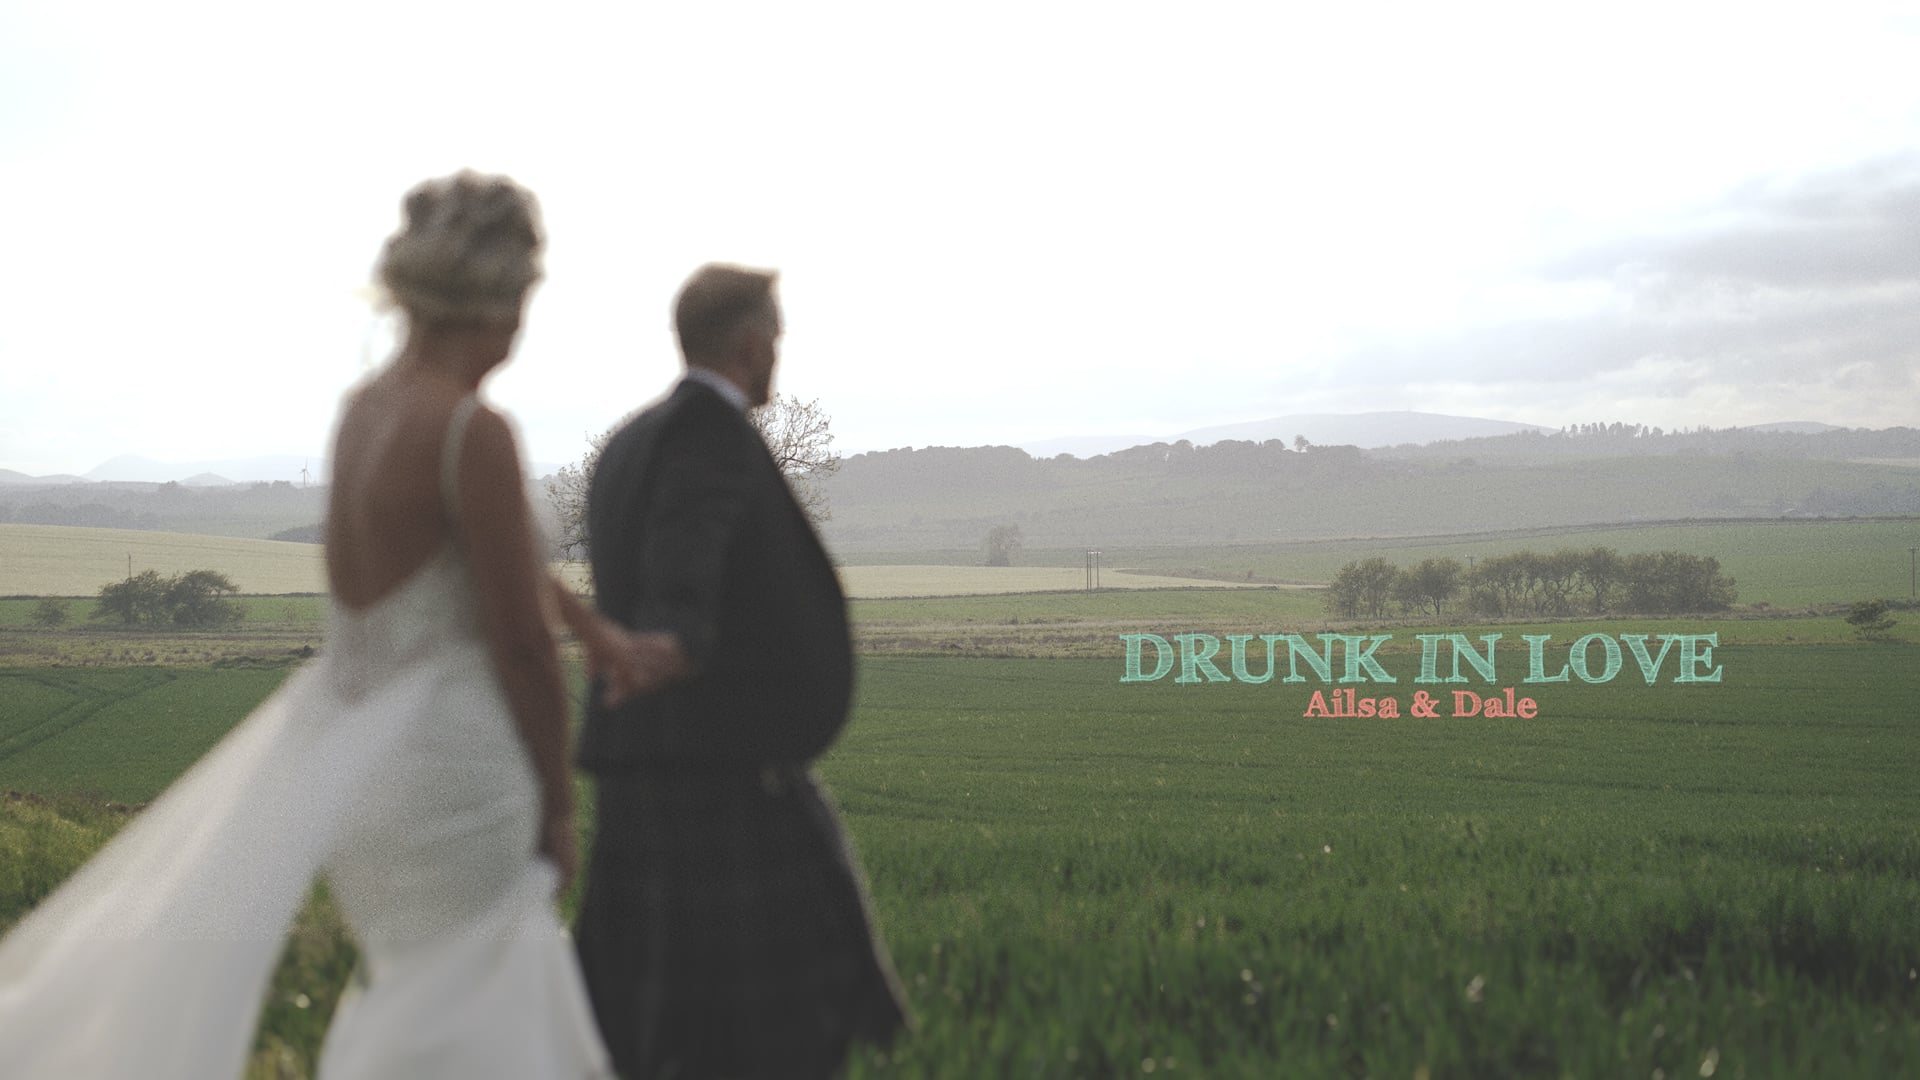 Drunk in Love by Ailsa & Dale